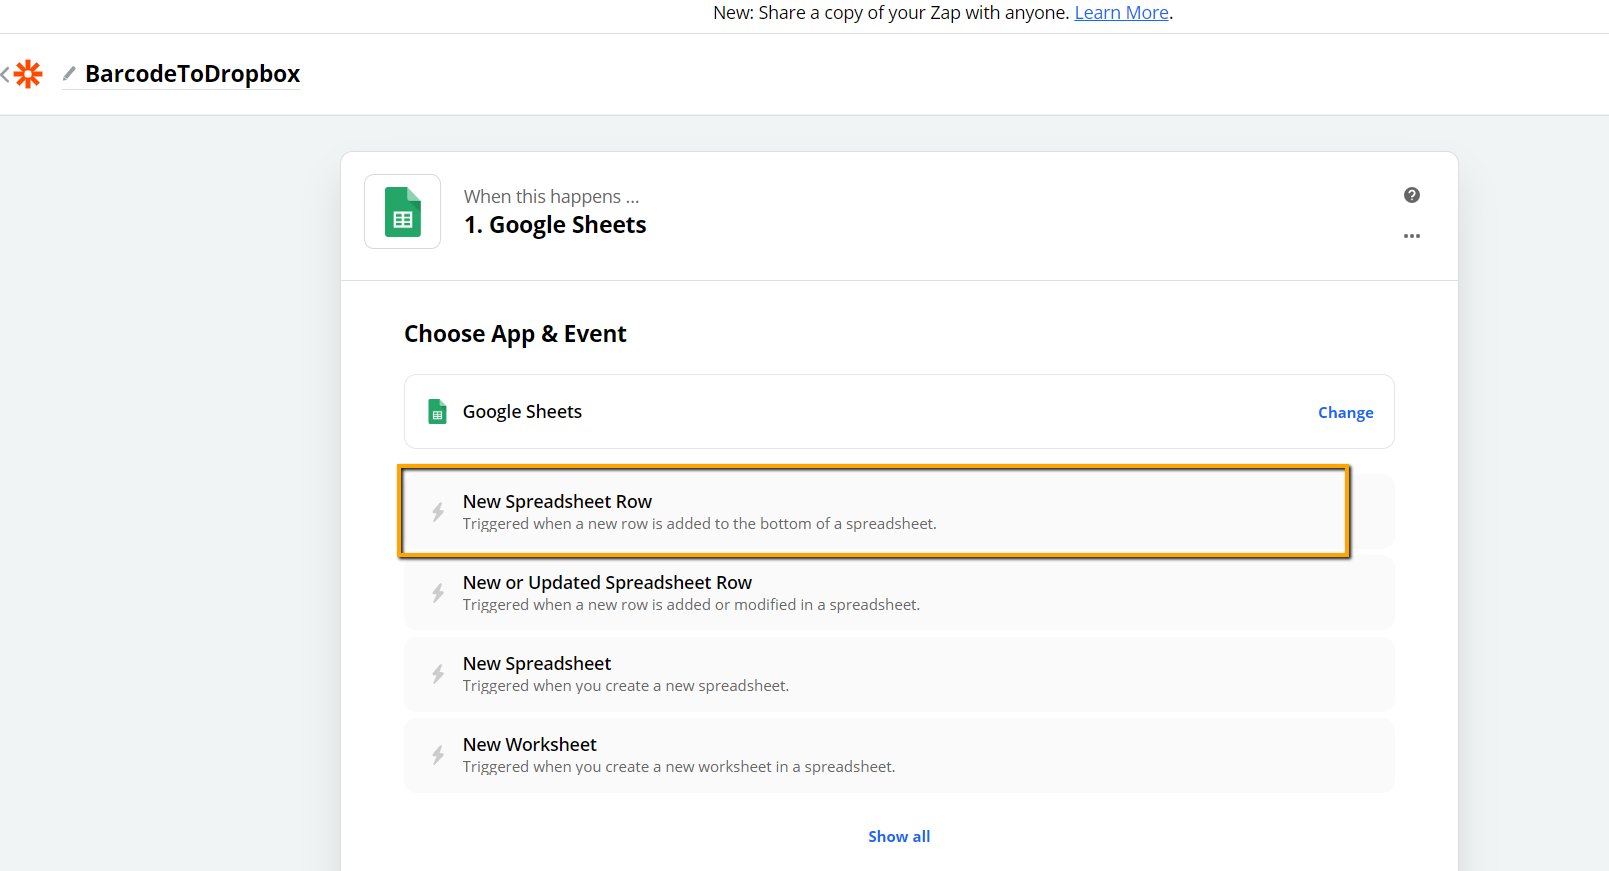 Select Google Sheets and New Spreadsheets Row As The Trigger